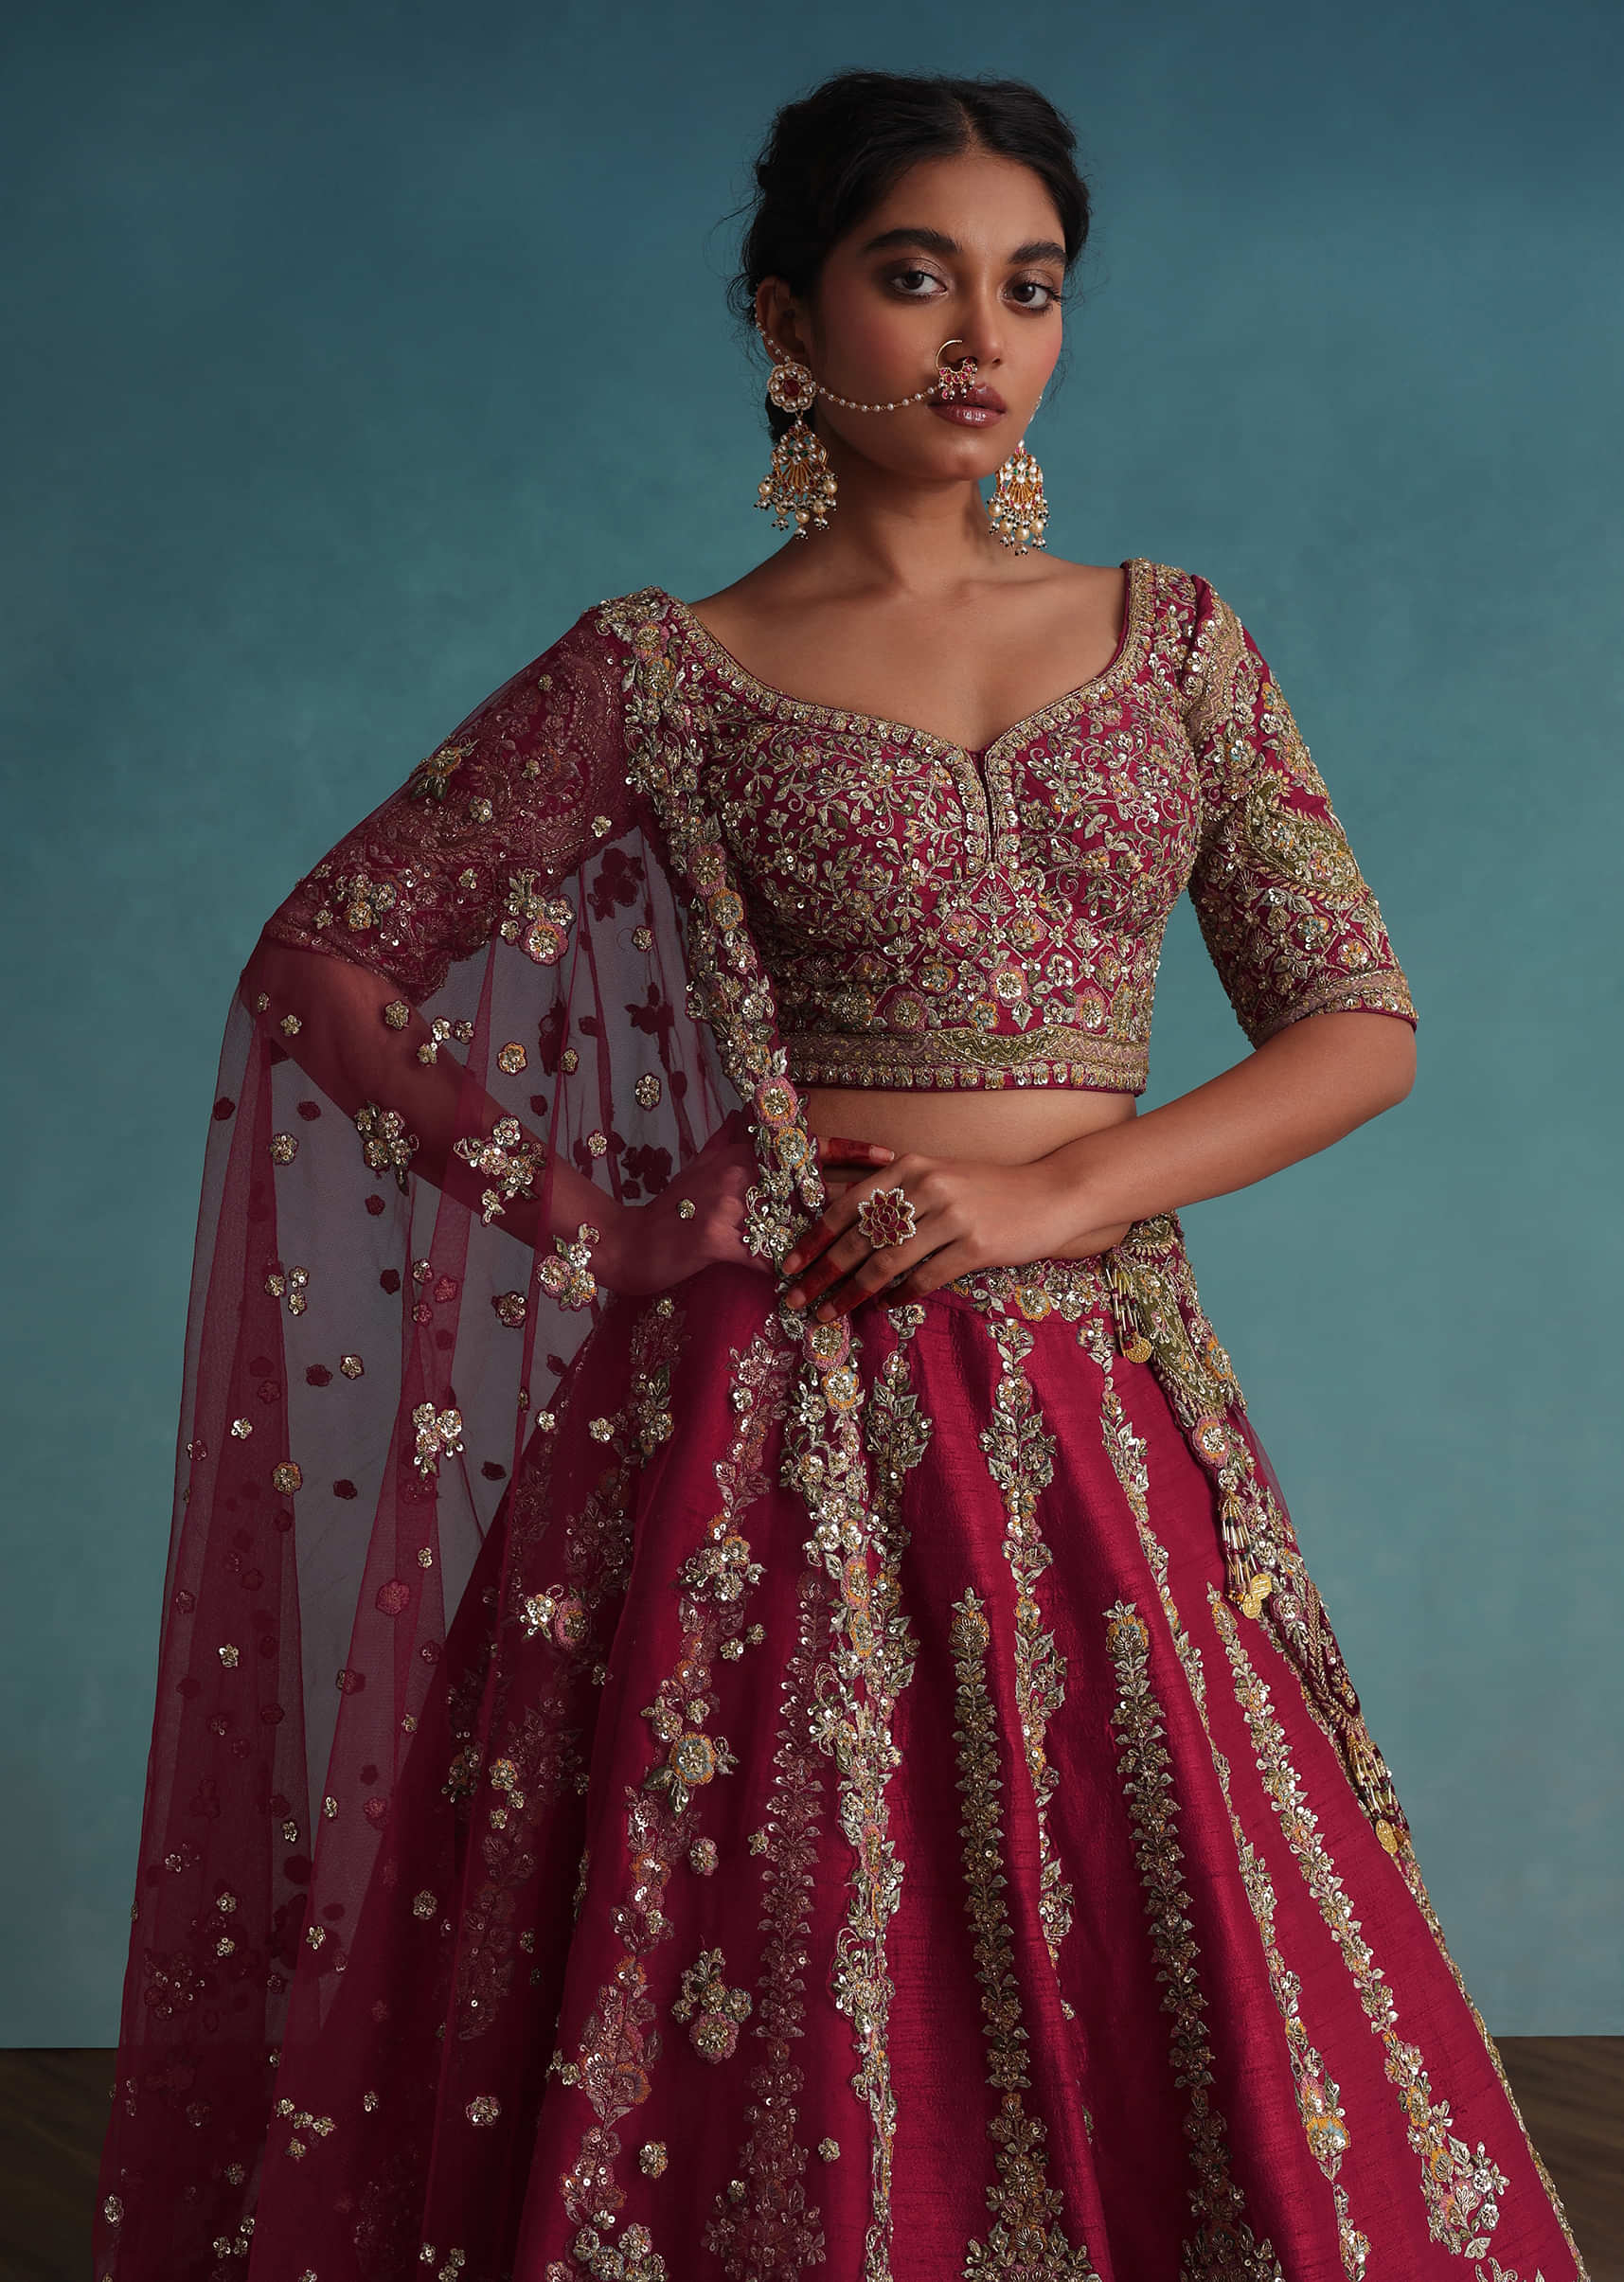 Apple Red Embroidered 16 Kali Bridal Lehenga In Raw Silk With Hand Embroidery